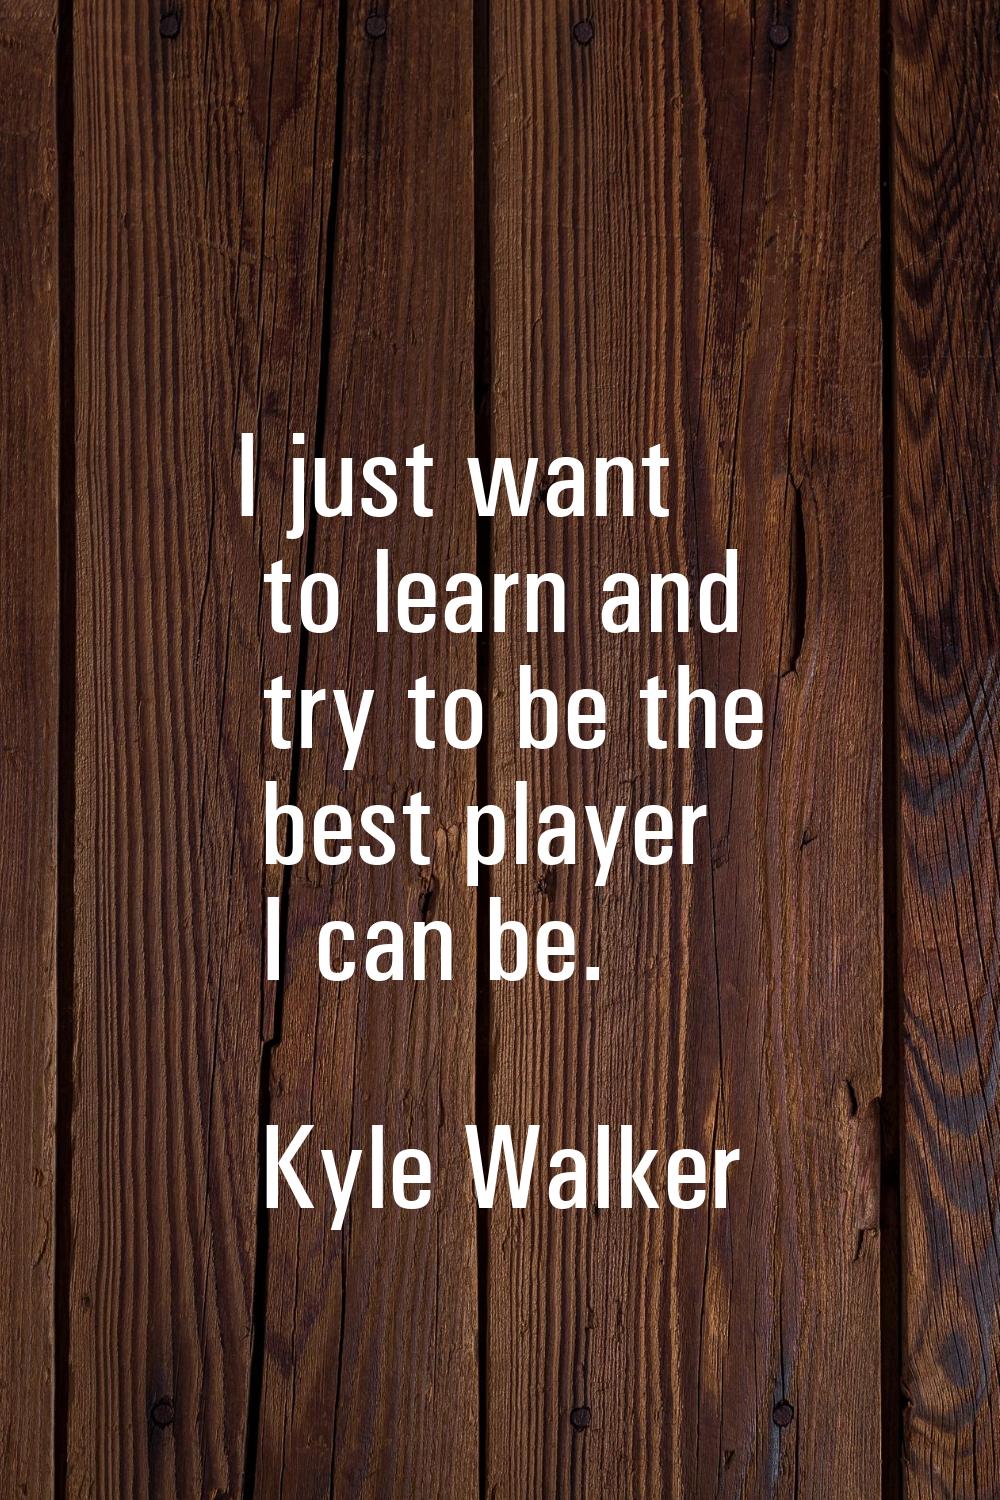 I just want to learn and try to be the best player I can be.